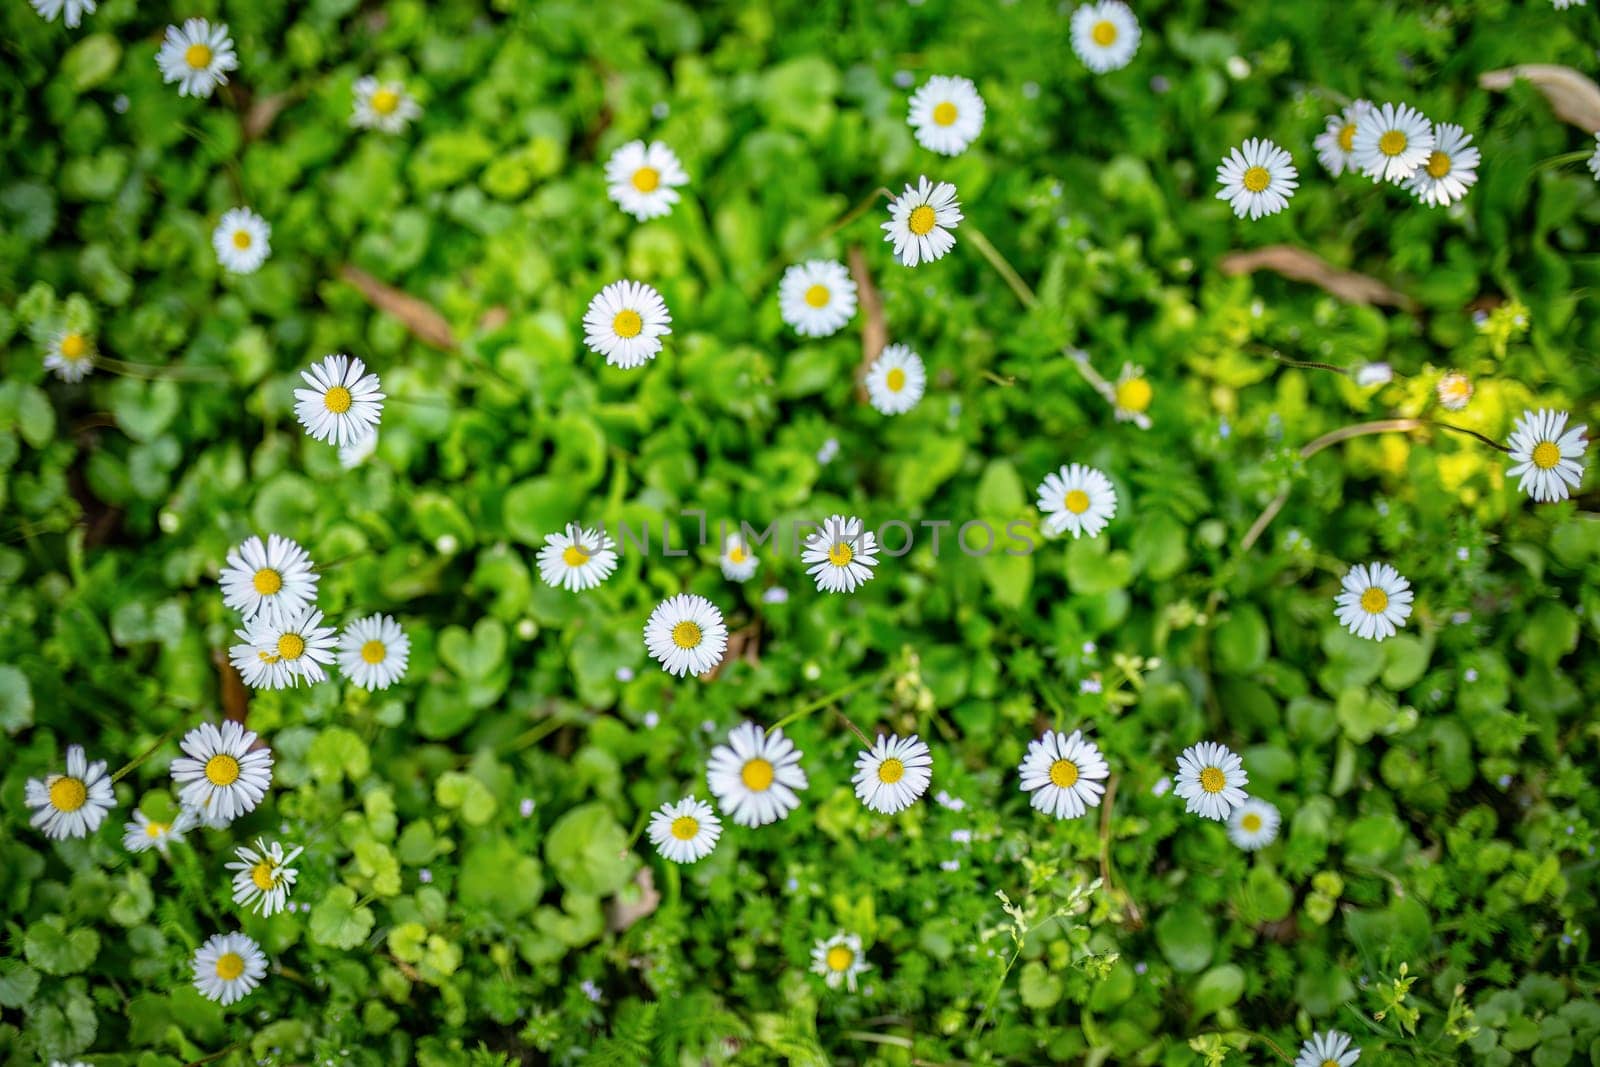 A cluster of daisies bloom among lush green grass in a vibrant field.